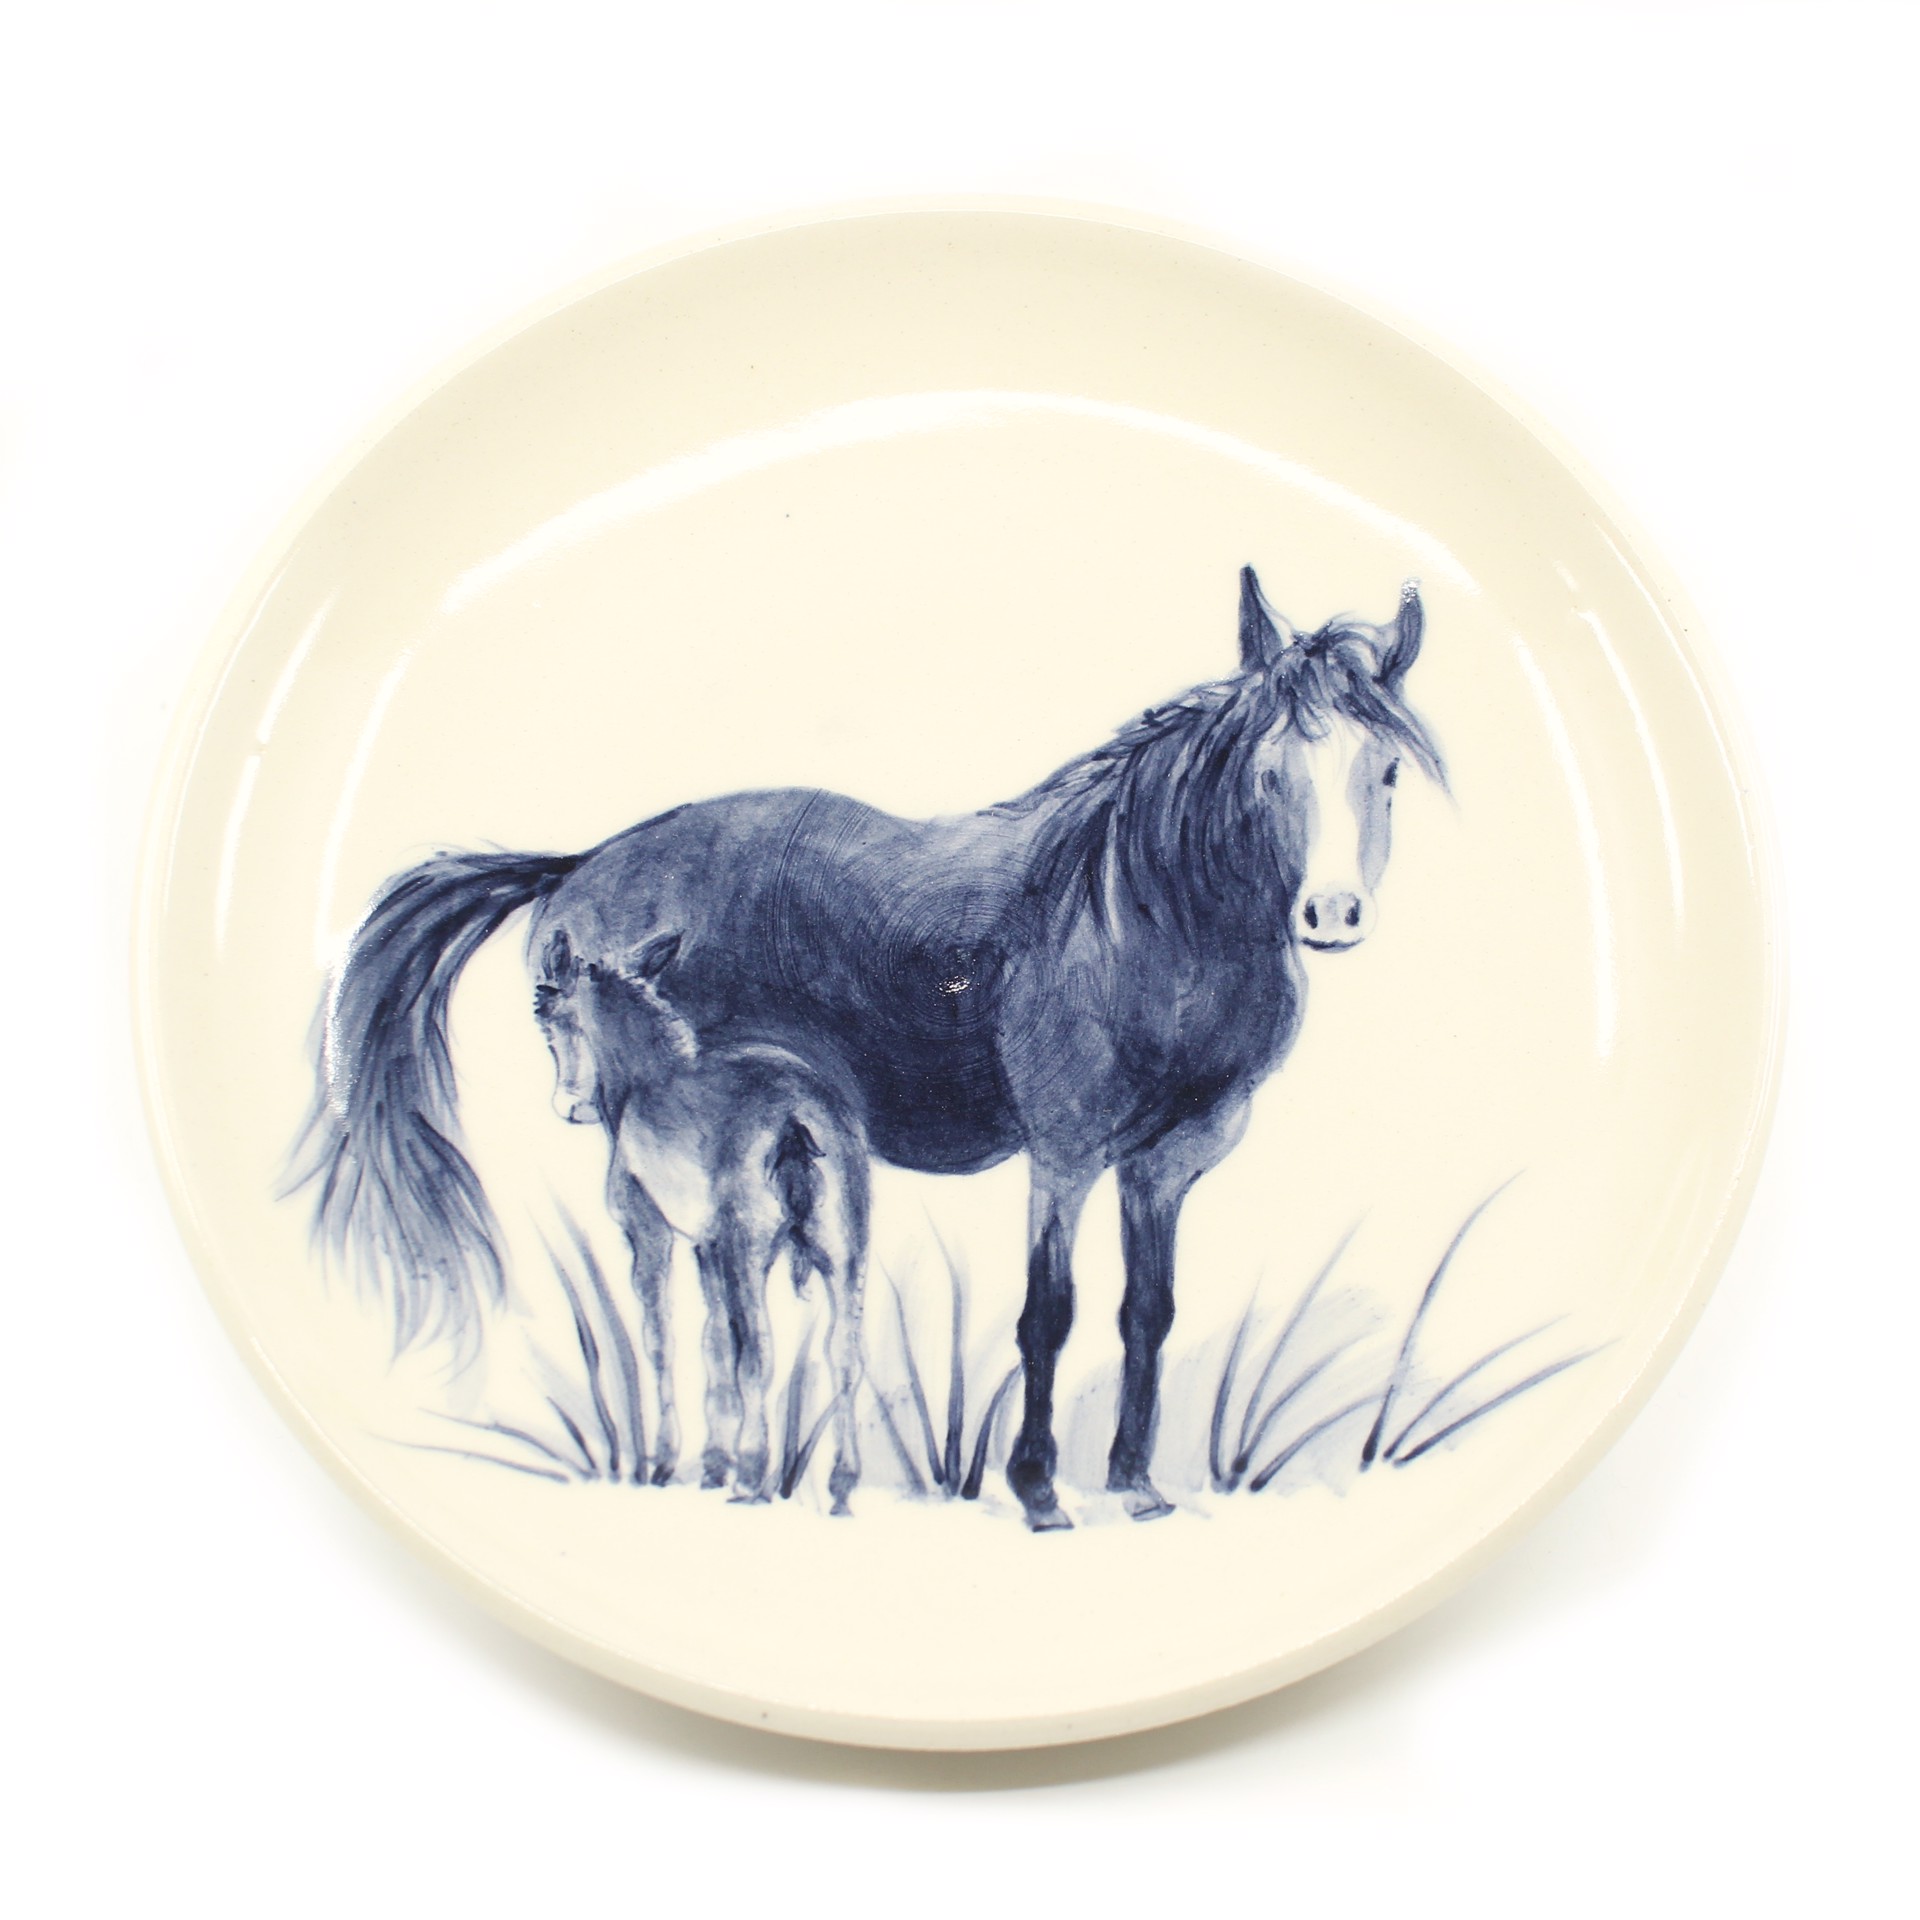 Wild Horses Plate by Kat Kinnick